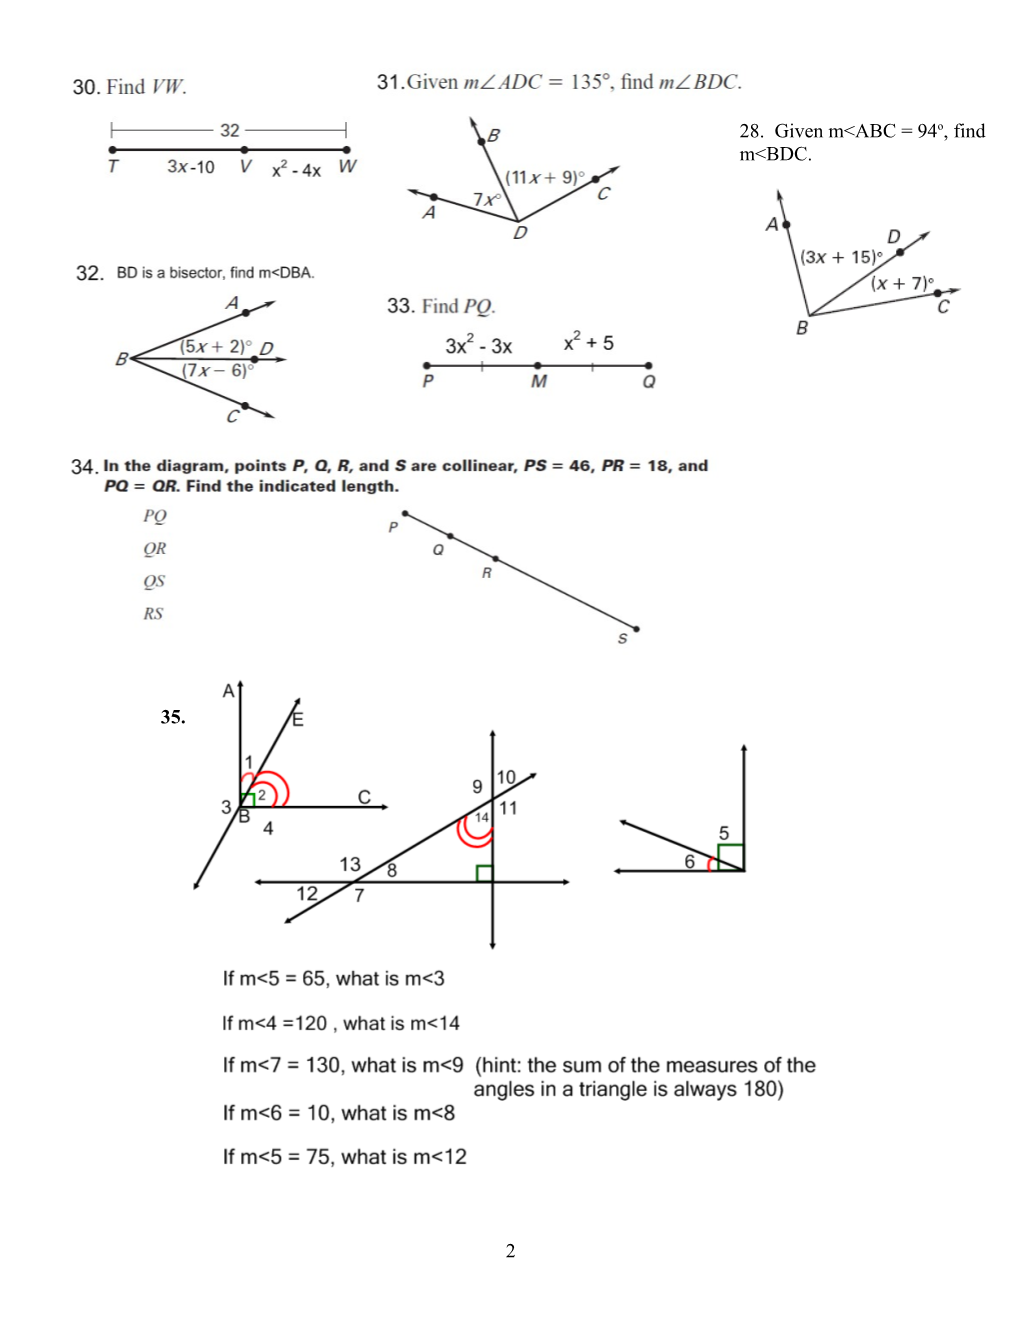 Geometry a 1St Sem. Final Review Worksheet Name ______